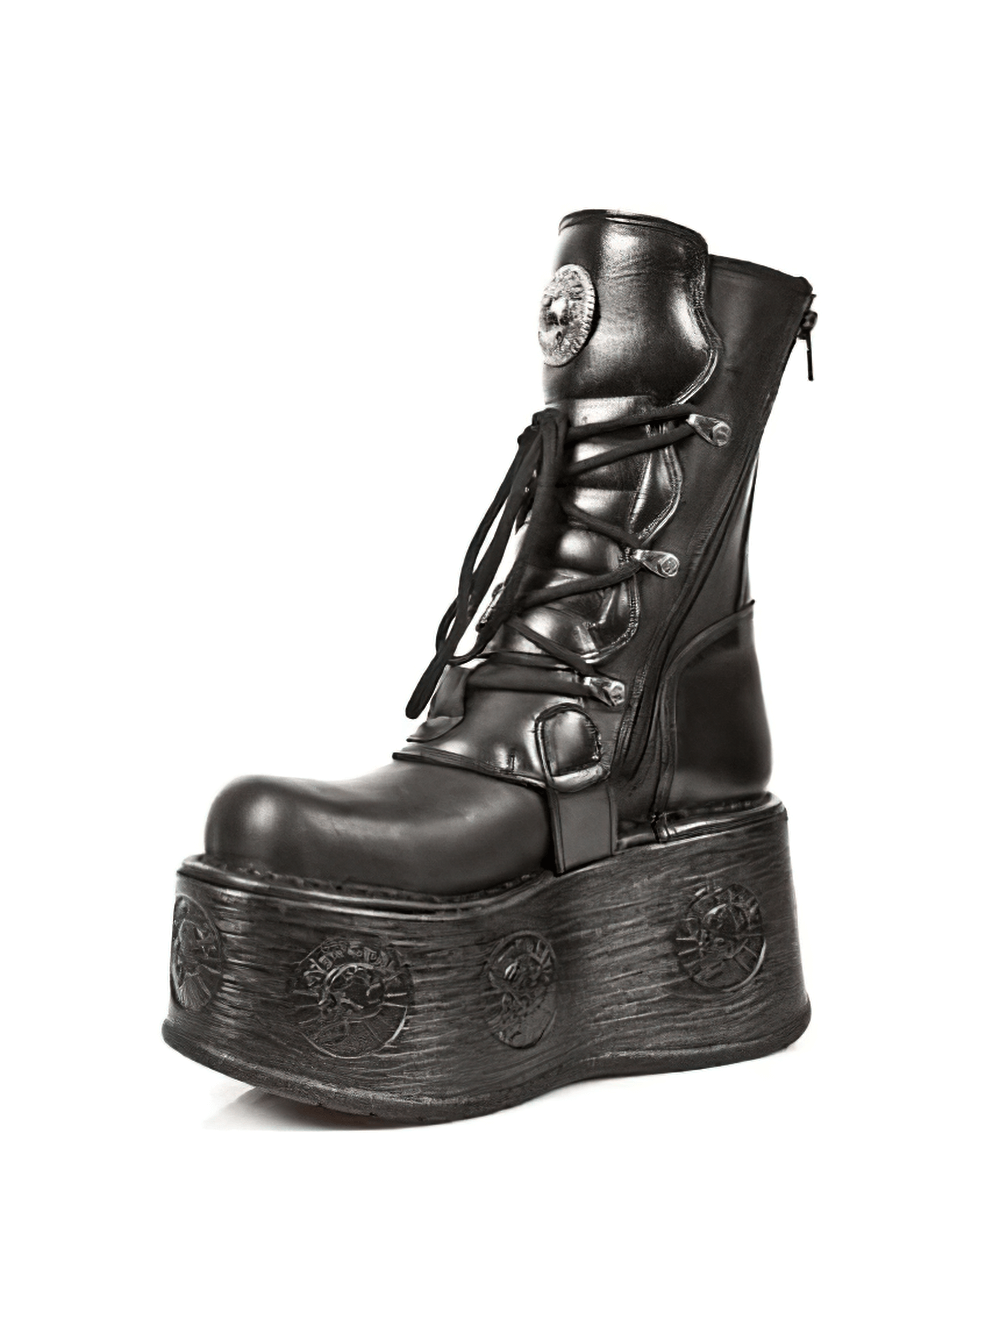 NEW ROCK Gothic High Platform Boots with Metal Accents